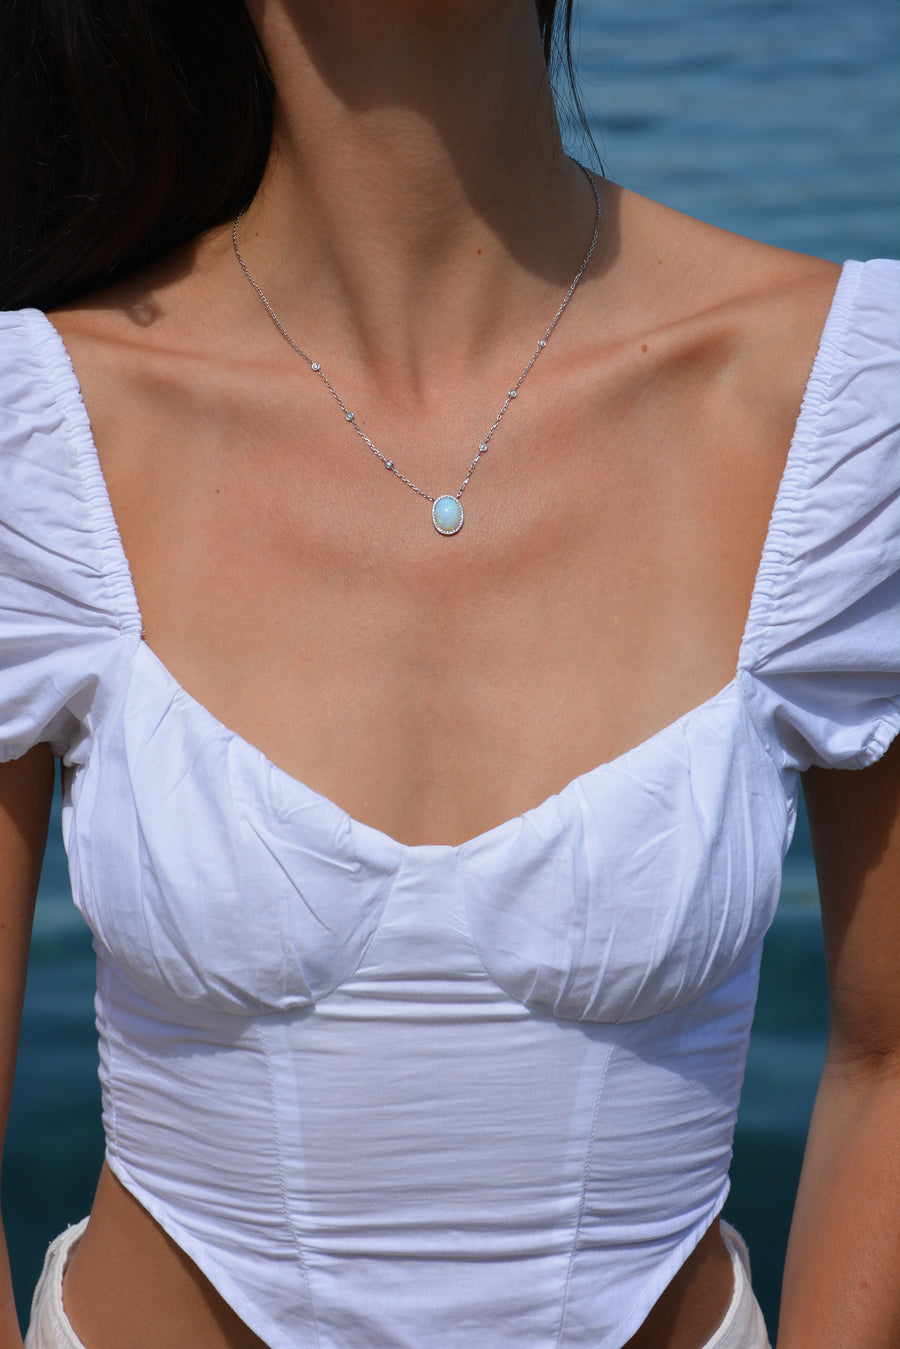 White Opal and Diamond necklace